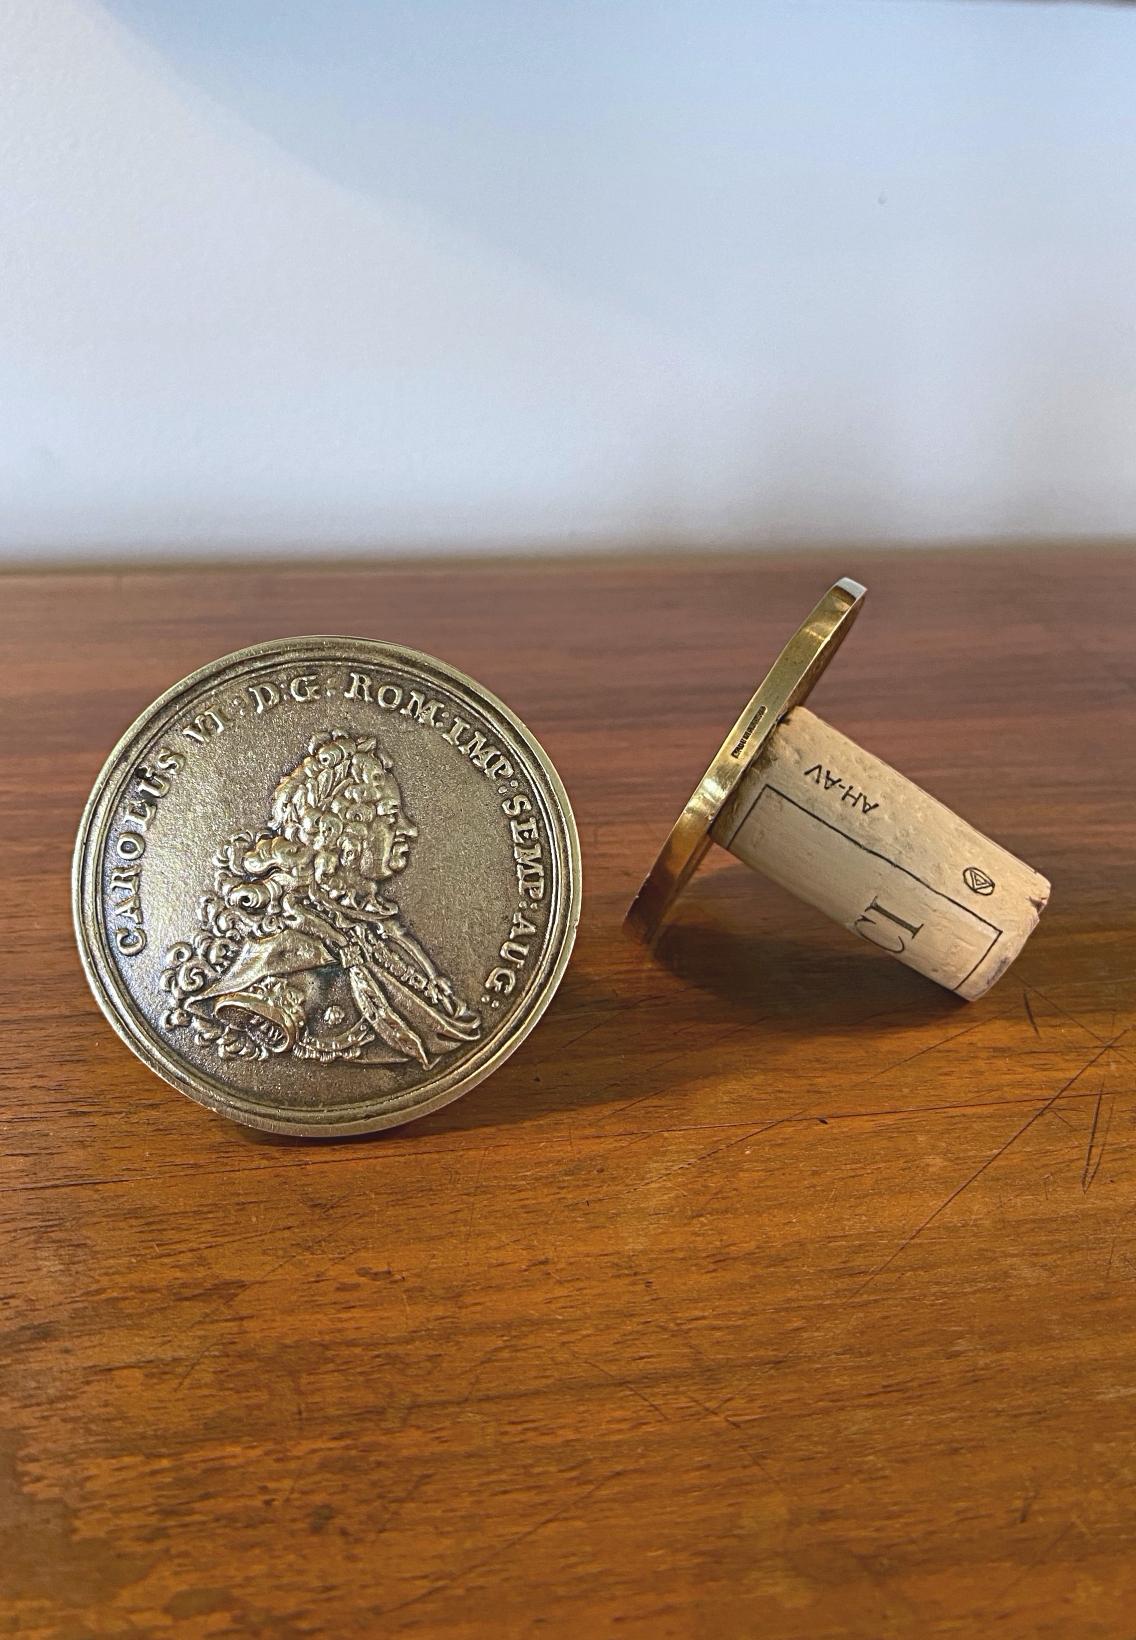 Pair of beautiful large Auböck coin bottle stoppers in solid brass, made by Werkstätten Carl Auböck in 1950s. The casting is very fine because these are the earlier stoppers. The stoppers are a copy of the famous Imperator Carolus VI coins.

We